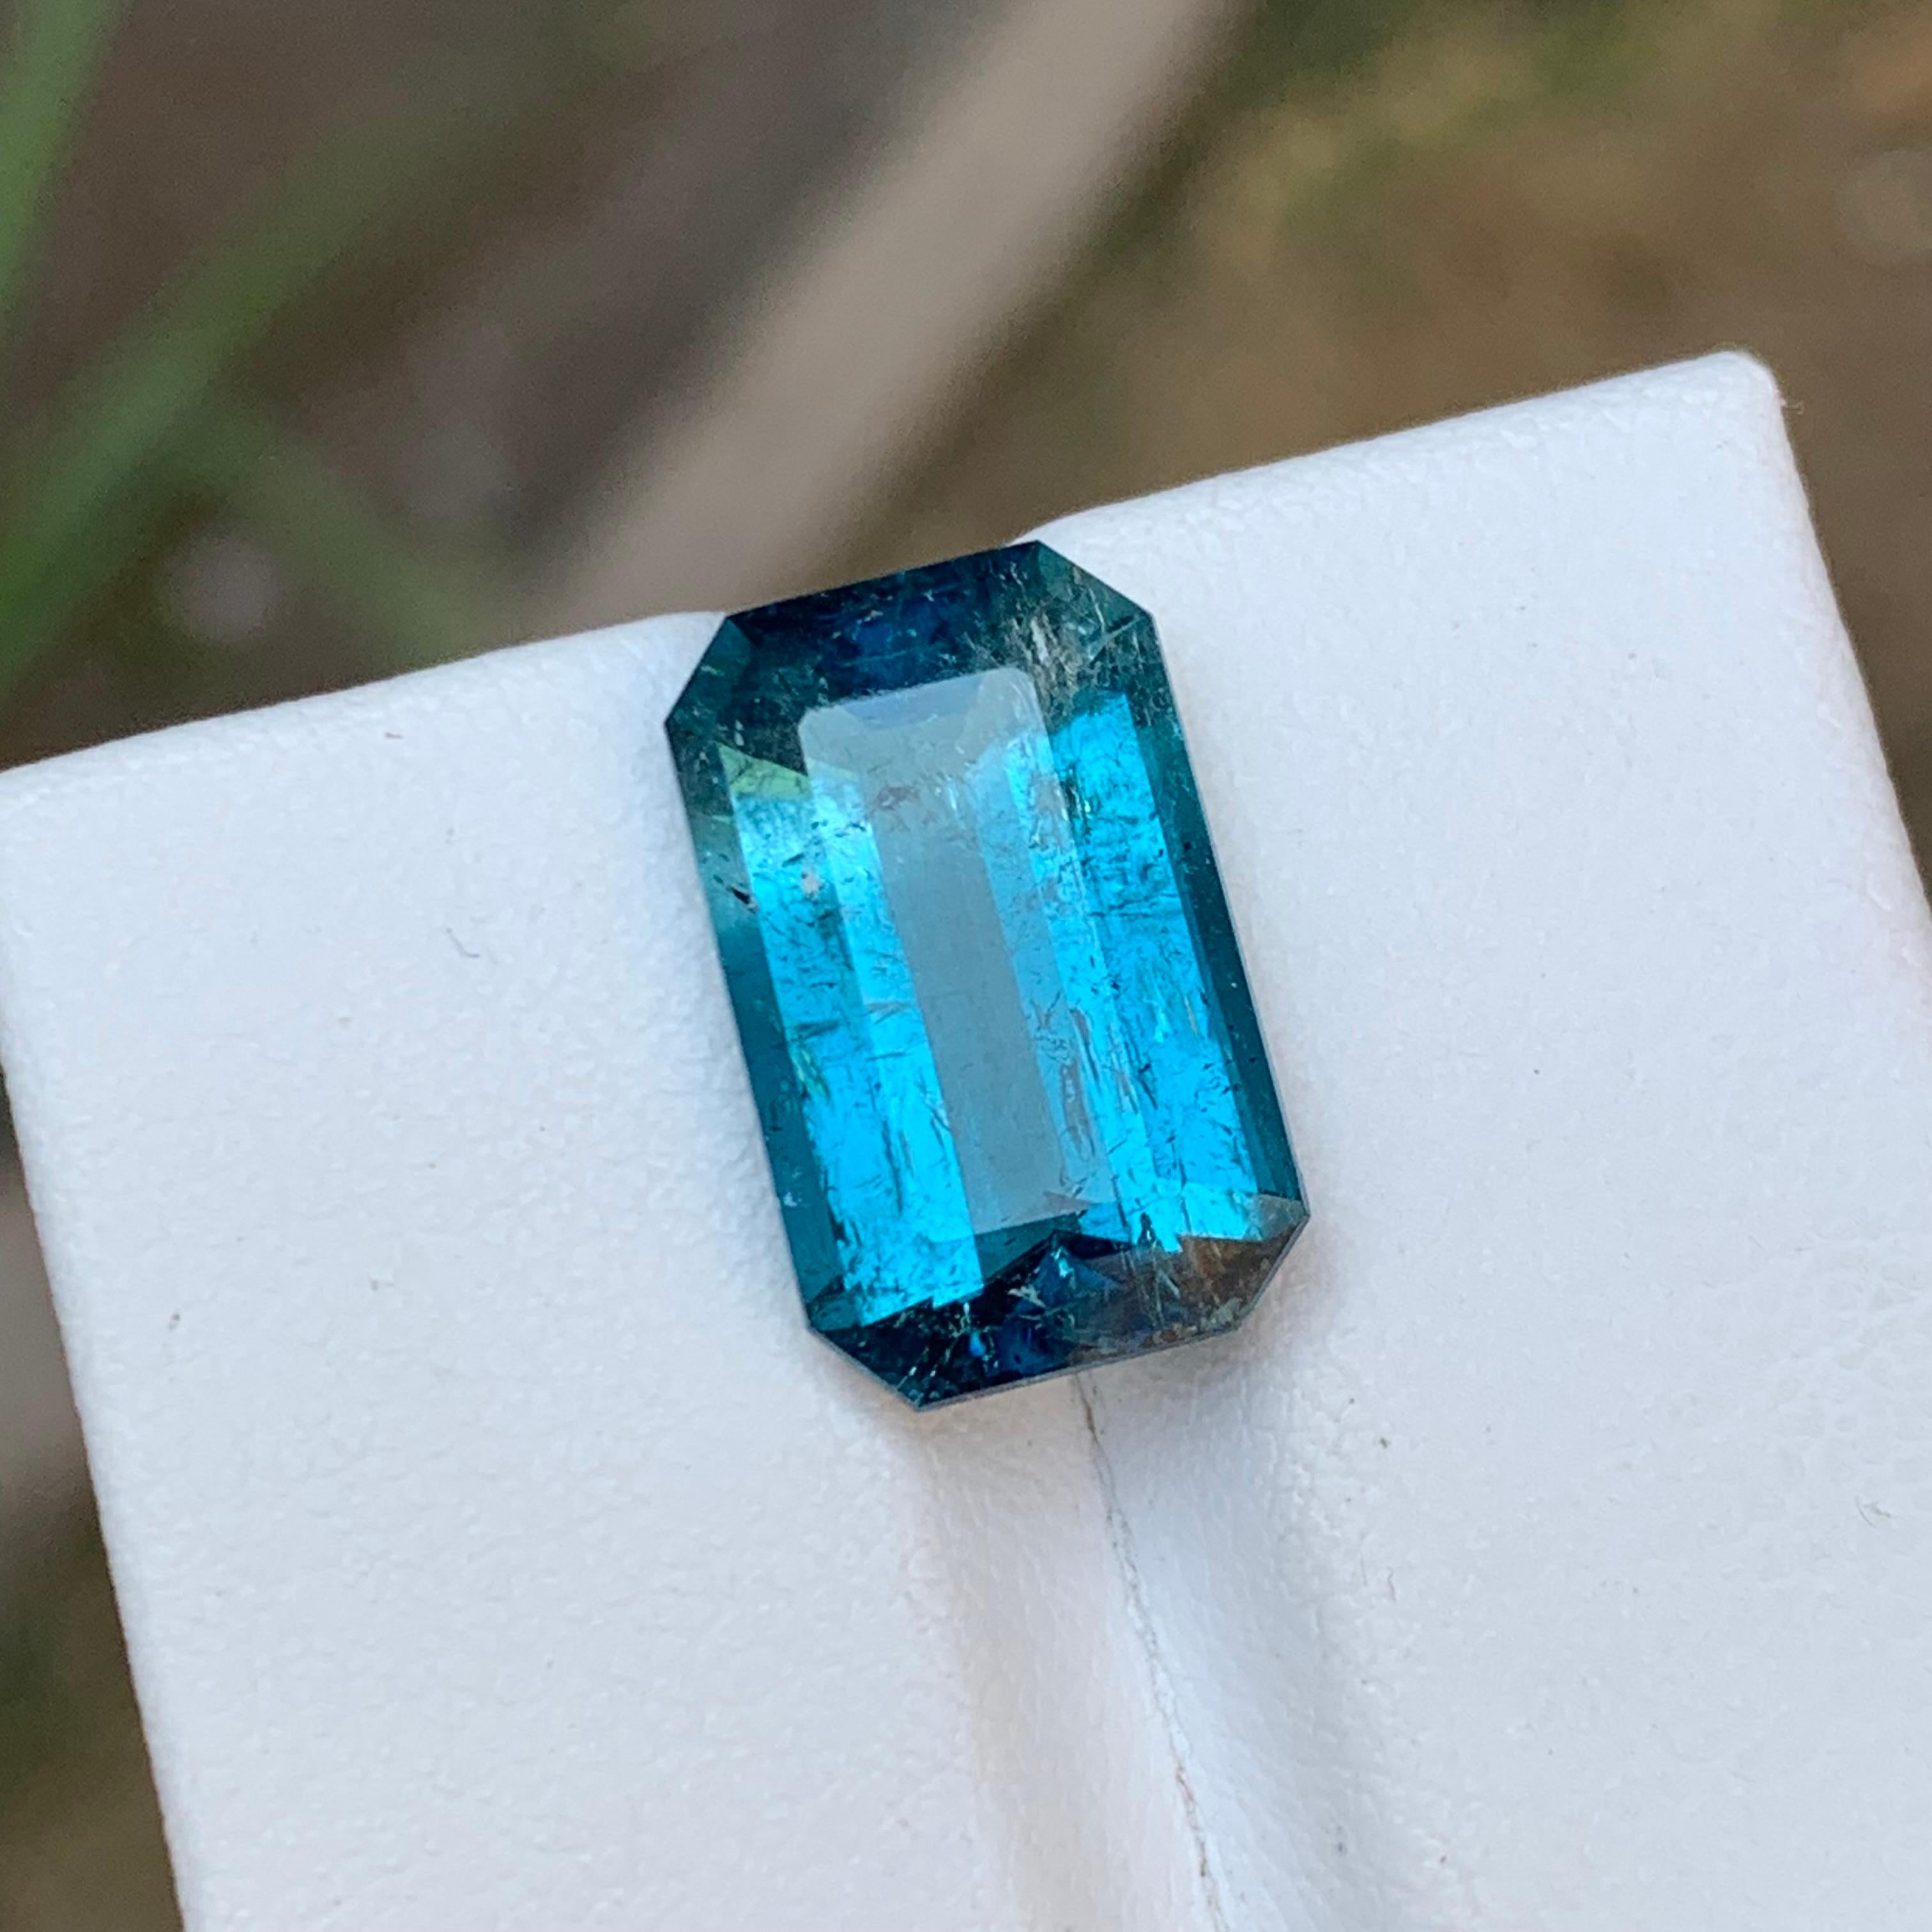 Rare Rich Electric Blue Tourmaline Gemstone 7.20 Ct Emerald Cut for Ring/Pendant For Sale 9